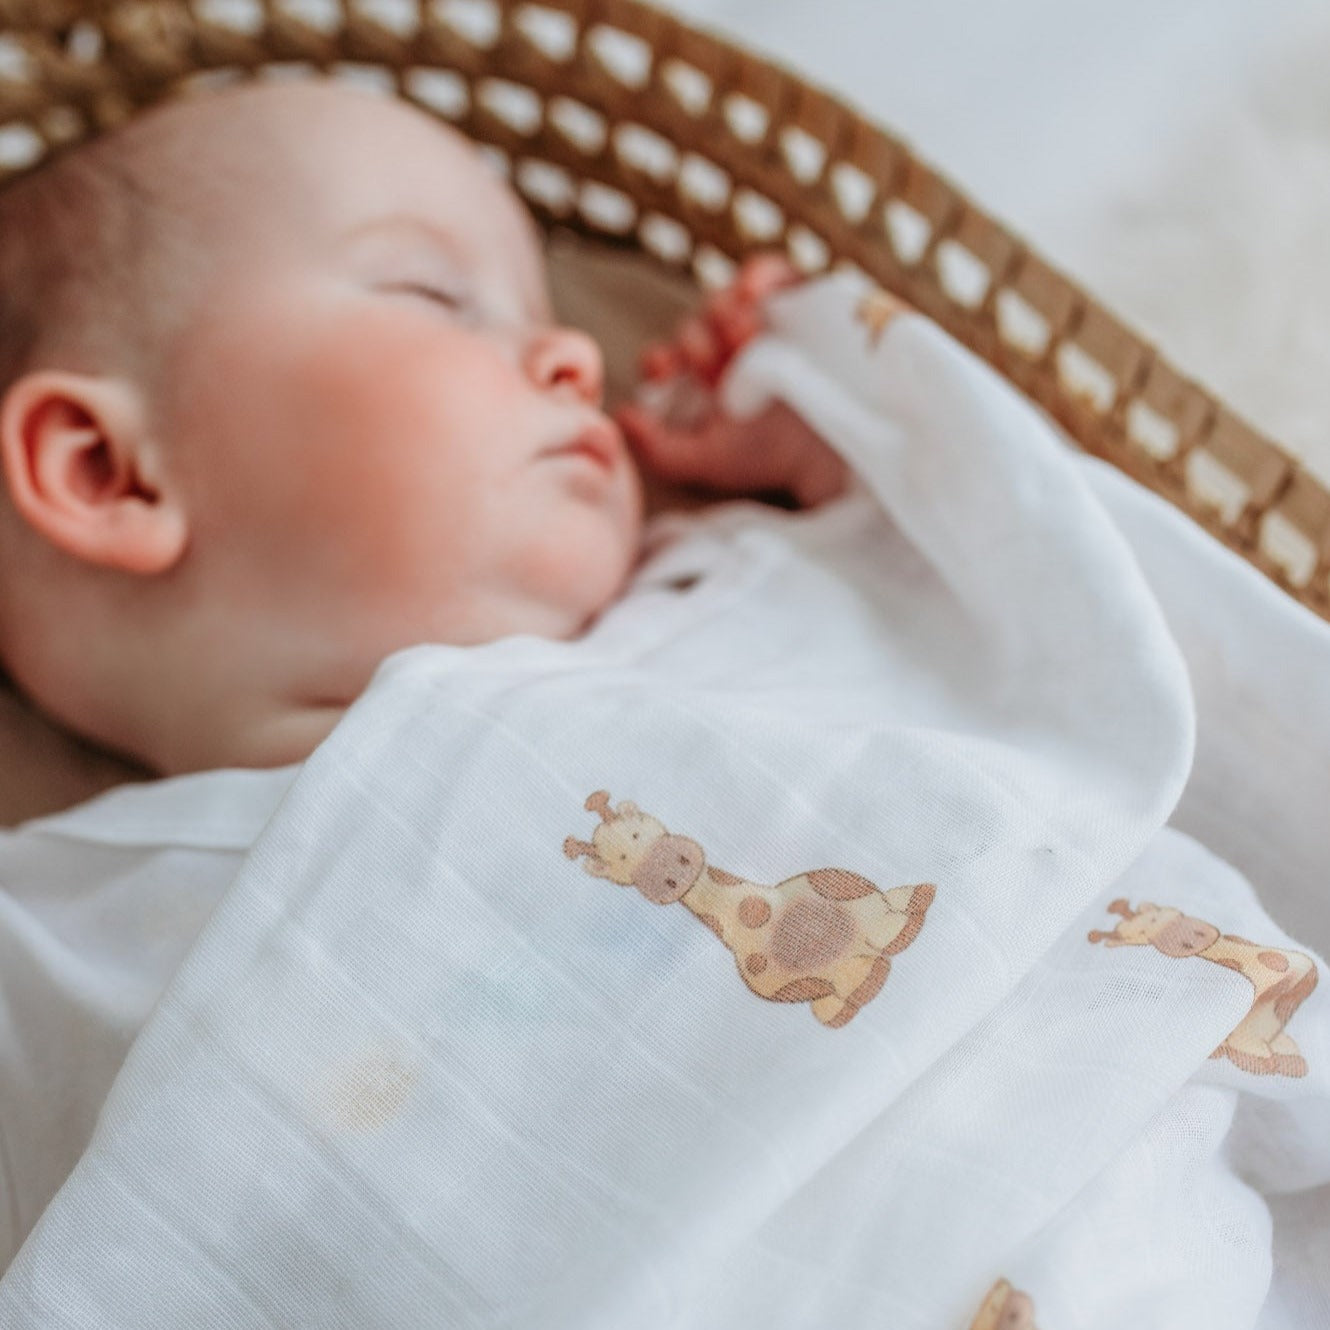 white organic cotton muslin swaddle blanket wrapped around a newborn sleeping baby in a baby basket with a cute safari giraffe printed design